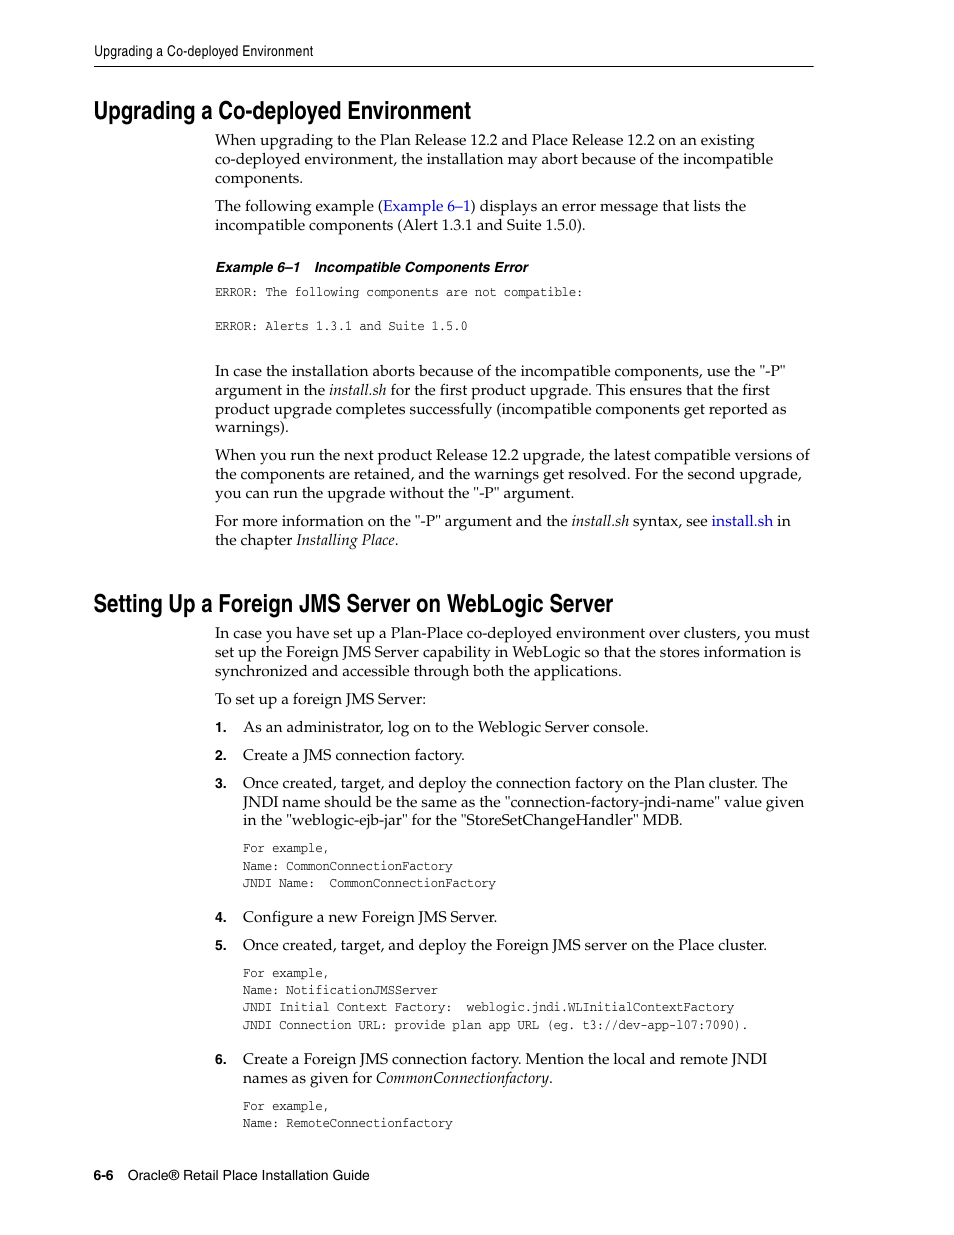 Upgrading a co-deployed environment, Setting up a foreign jms server on weblogic server | Oracle Audio Technologies Oracle Retail Place 12.2 User Manual | Page 60 / 68